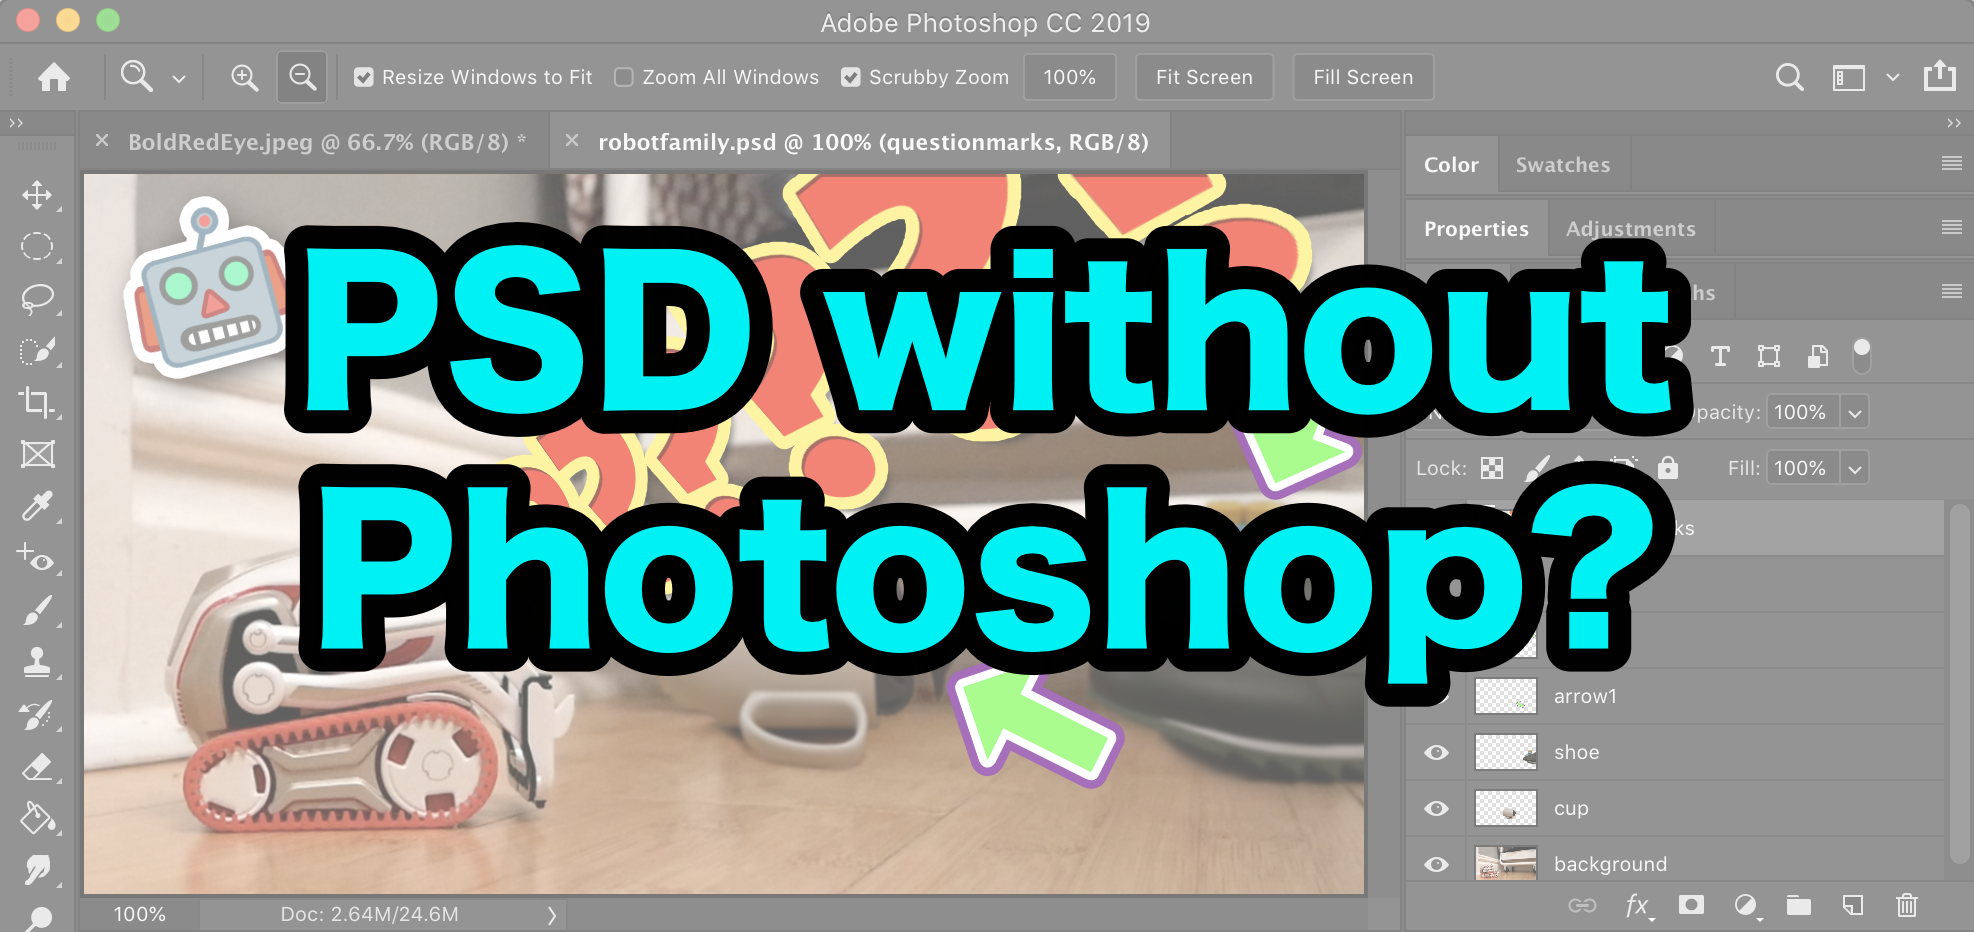 What is a PSD File and How to Use it?